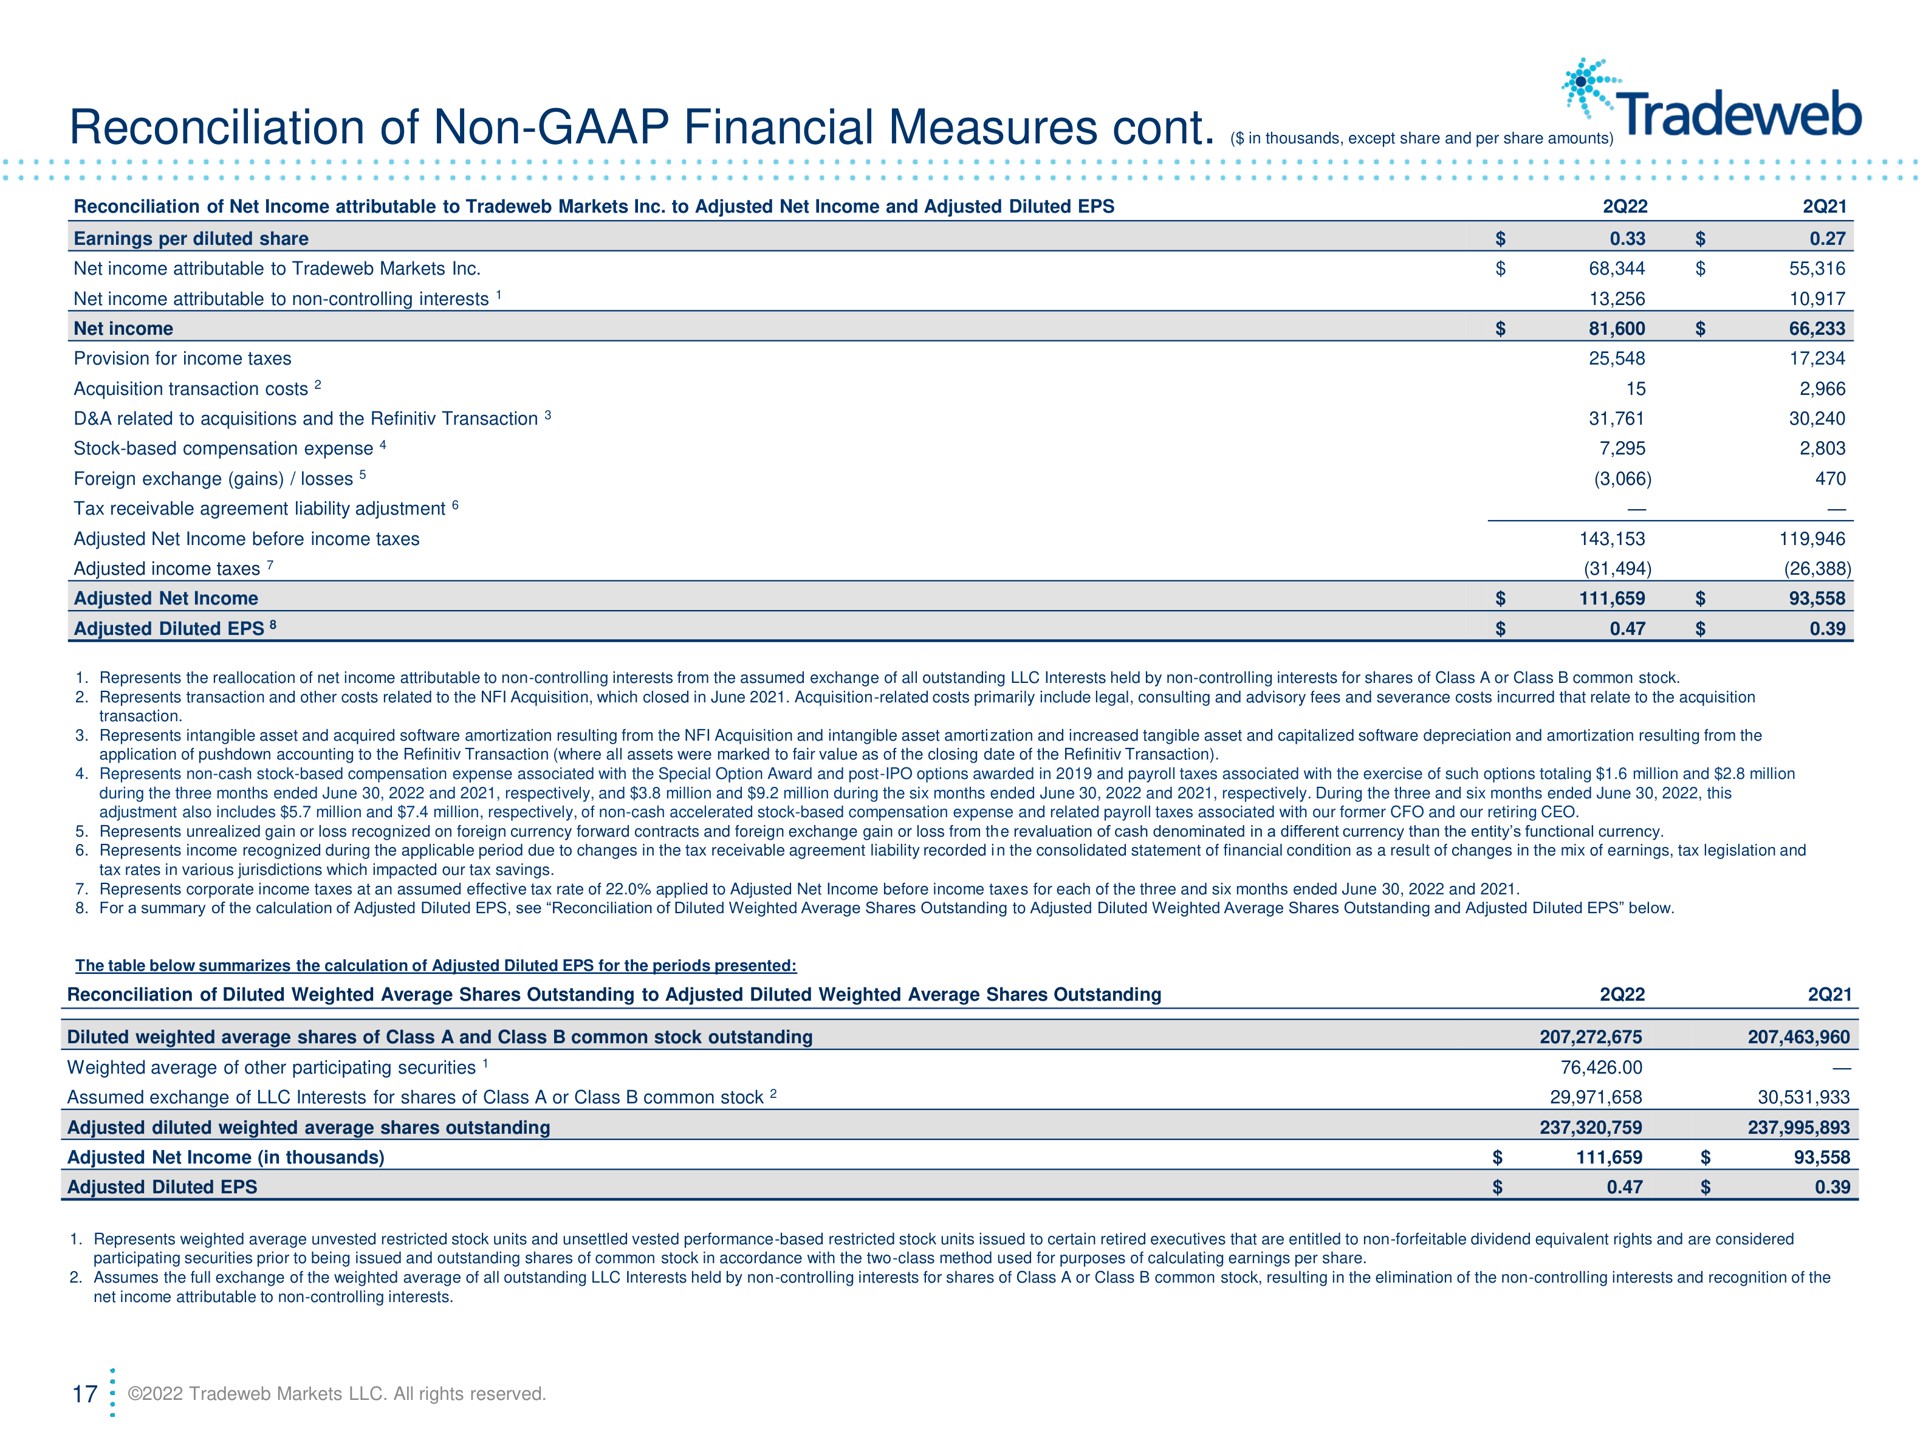 reconciliation of non financial measures in thousands except share and per share amounts | Tradeweb